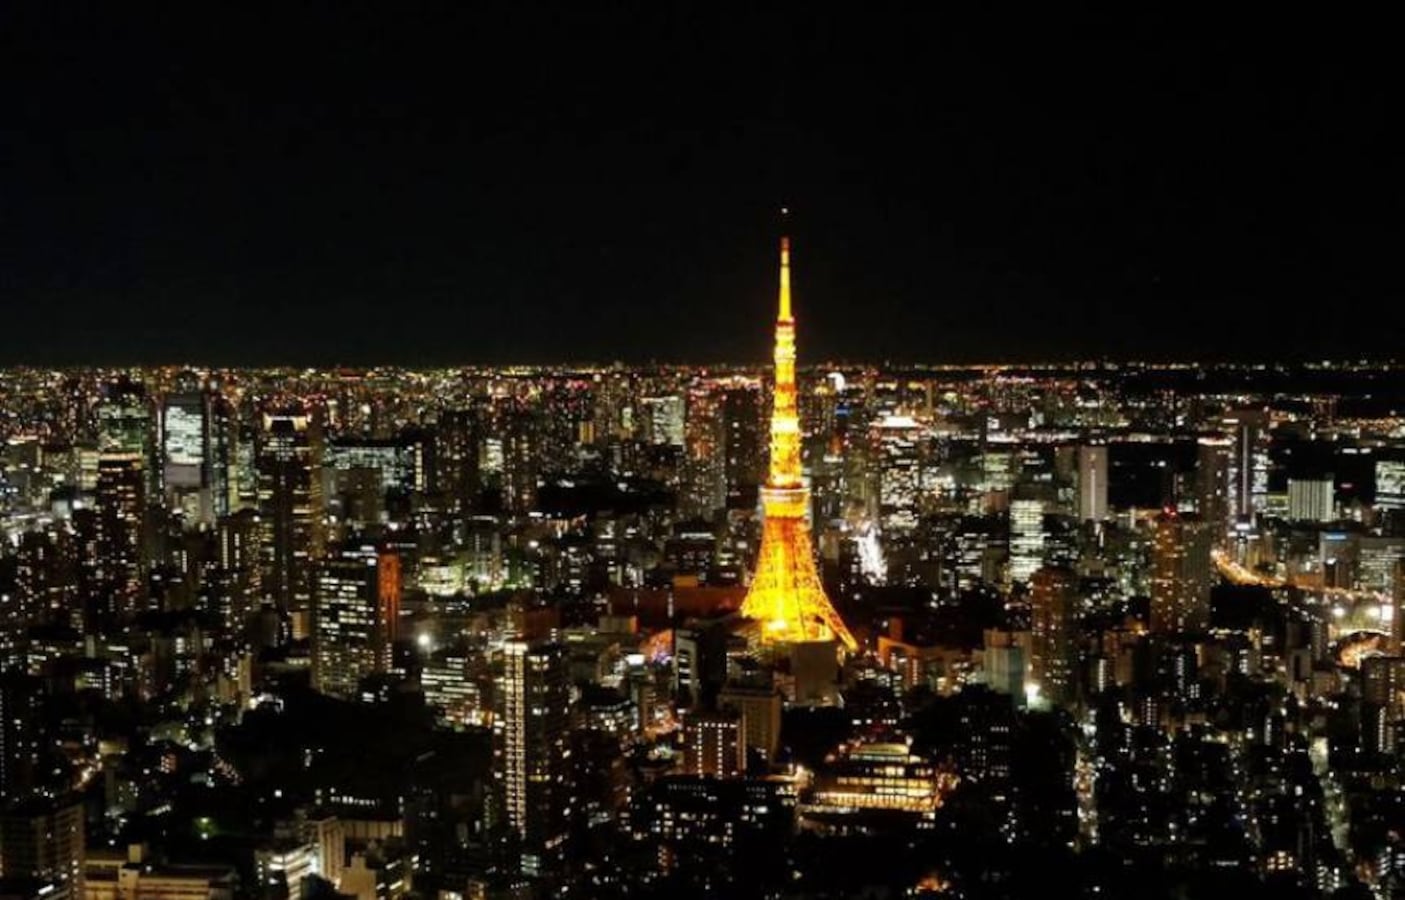 20 Absolutely Romantic Date Spots in Tokyo | All About Japan